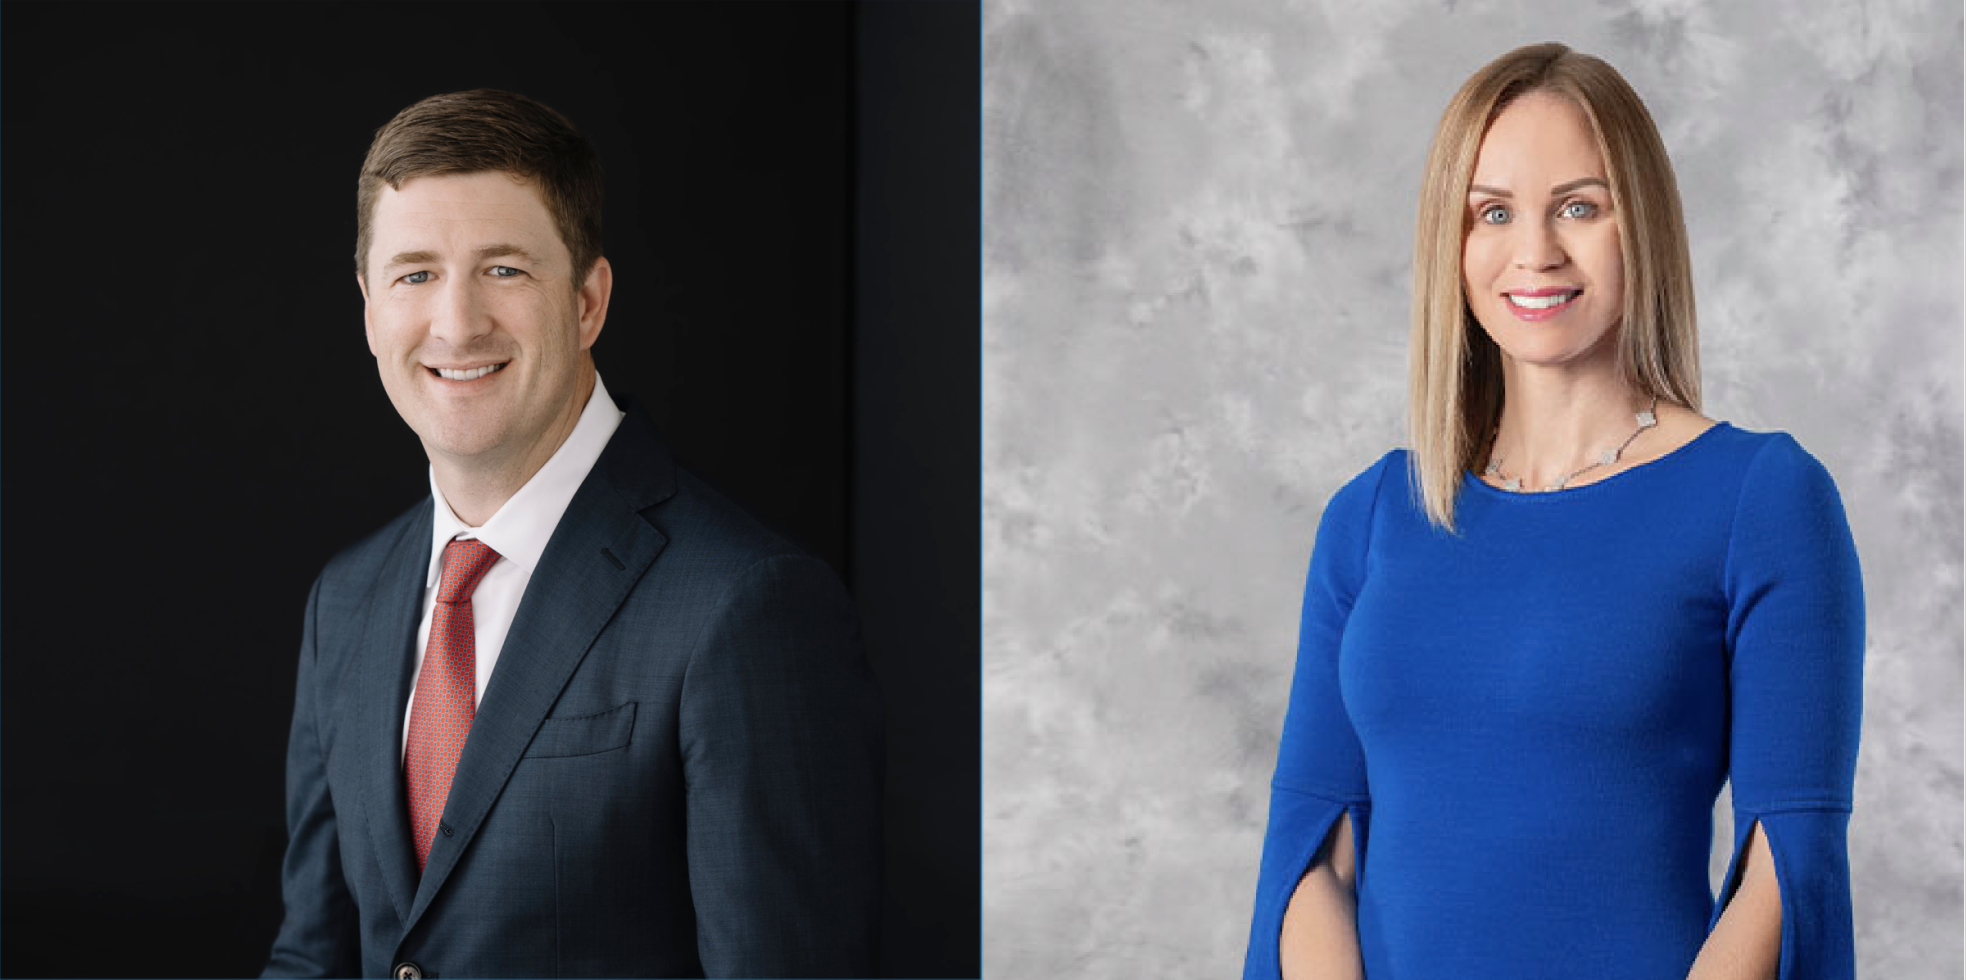 Justin Hollis and Cady Johnson have joined the Florida Polytechnic University Foundation Board of Directors.